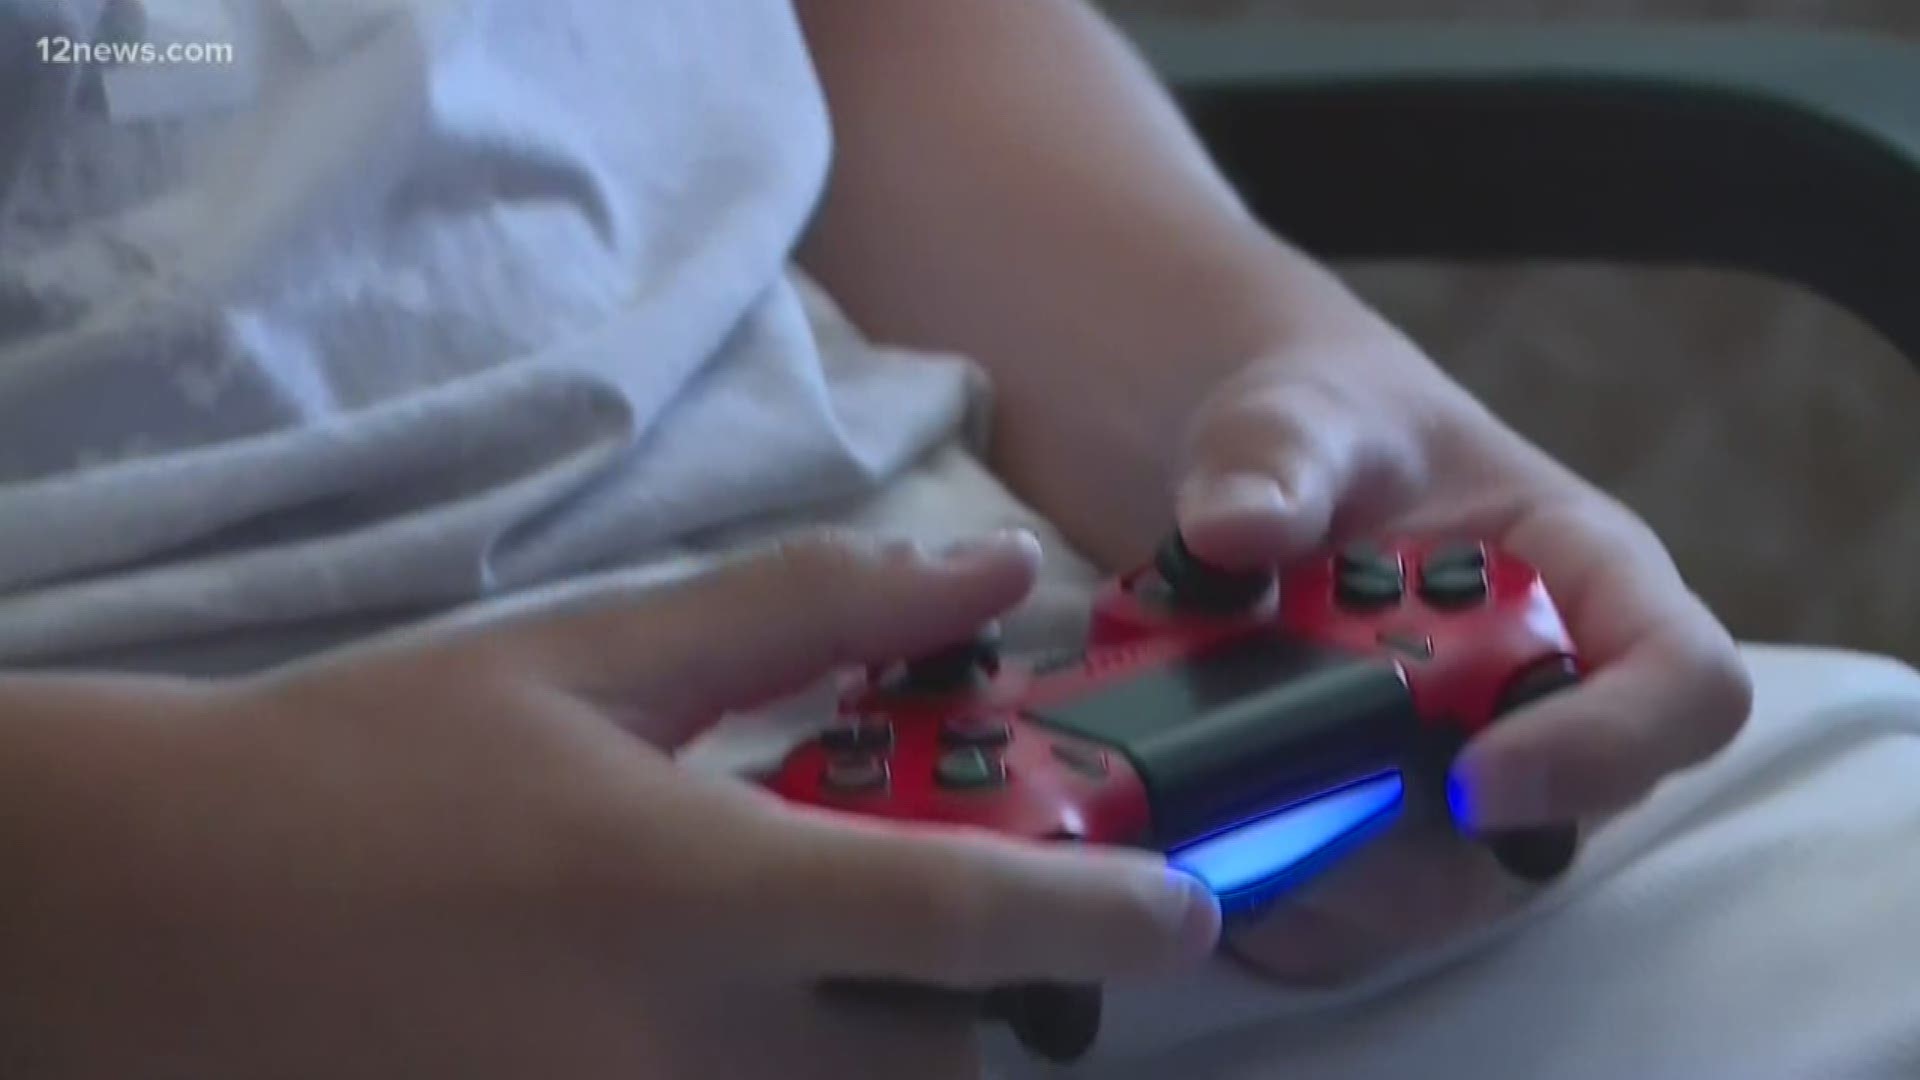 One Peoria mom went to extreme measures to curb her son's gaming addiction. Team 12's Matt Yurus has the story.